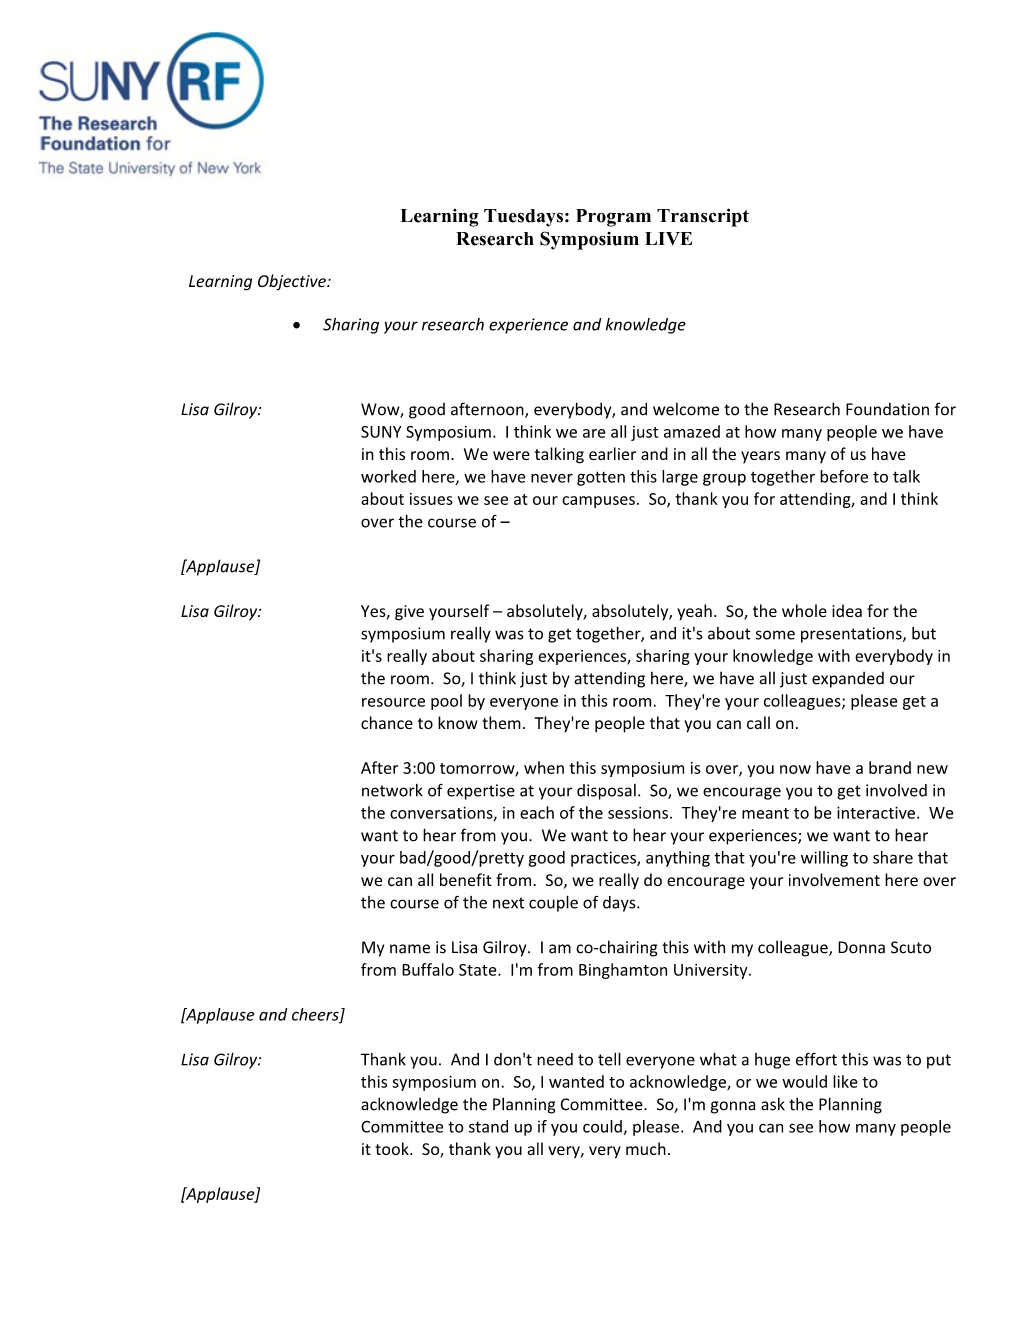 Learning Tuesdays: Program Transcript Research Symposium LIVE